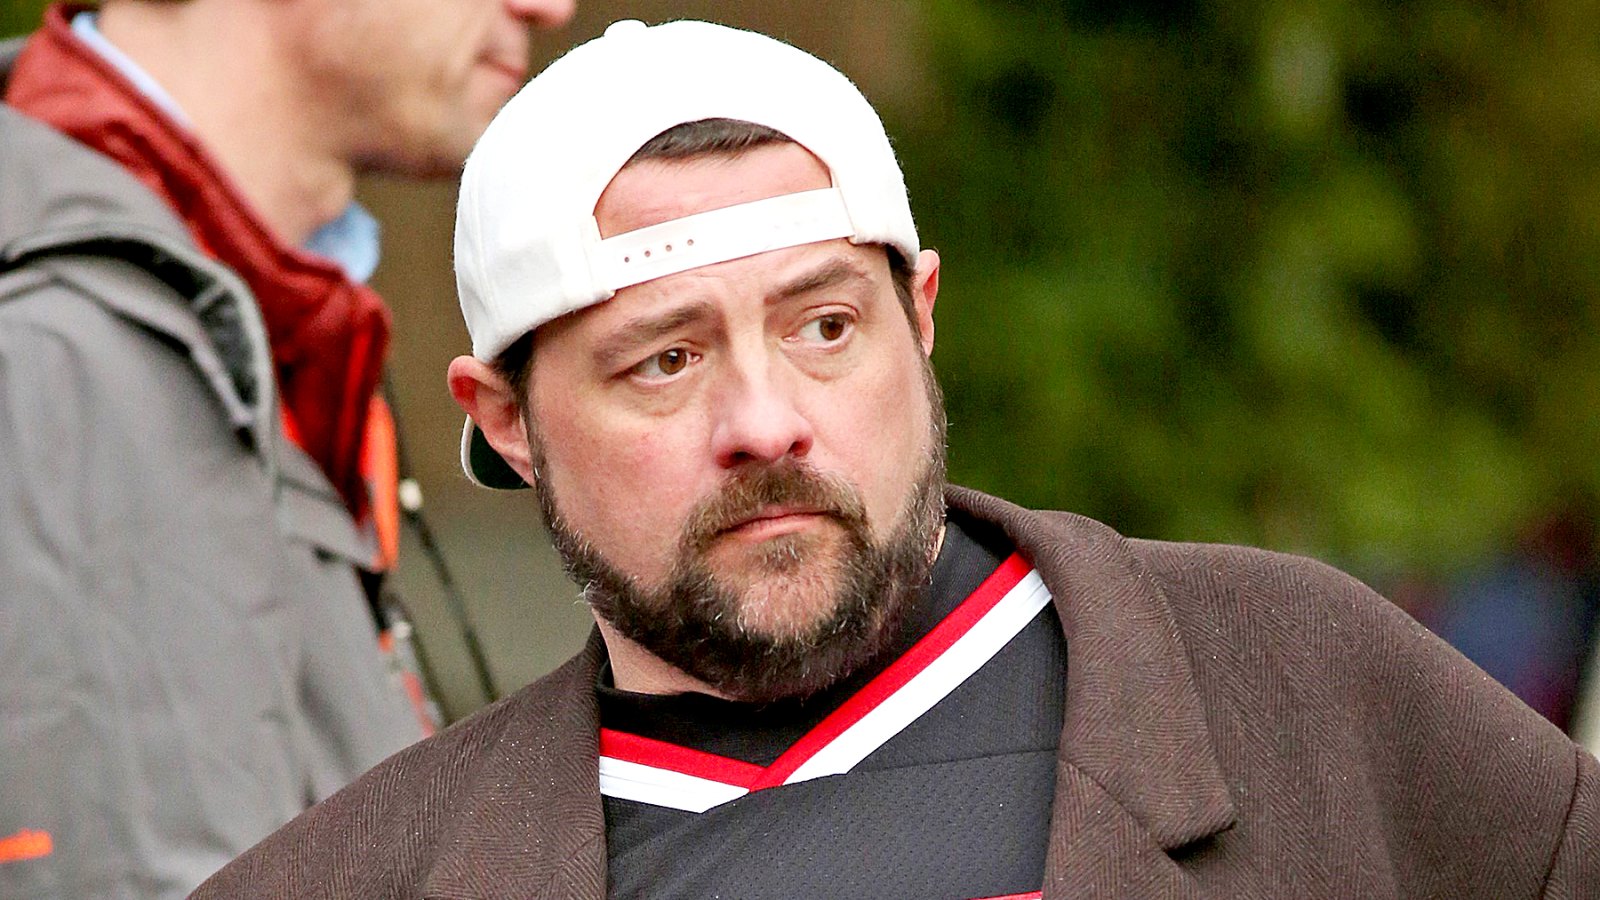 KevinSmith on X: Look at that sweaty mess of a 48 yr old! He's